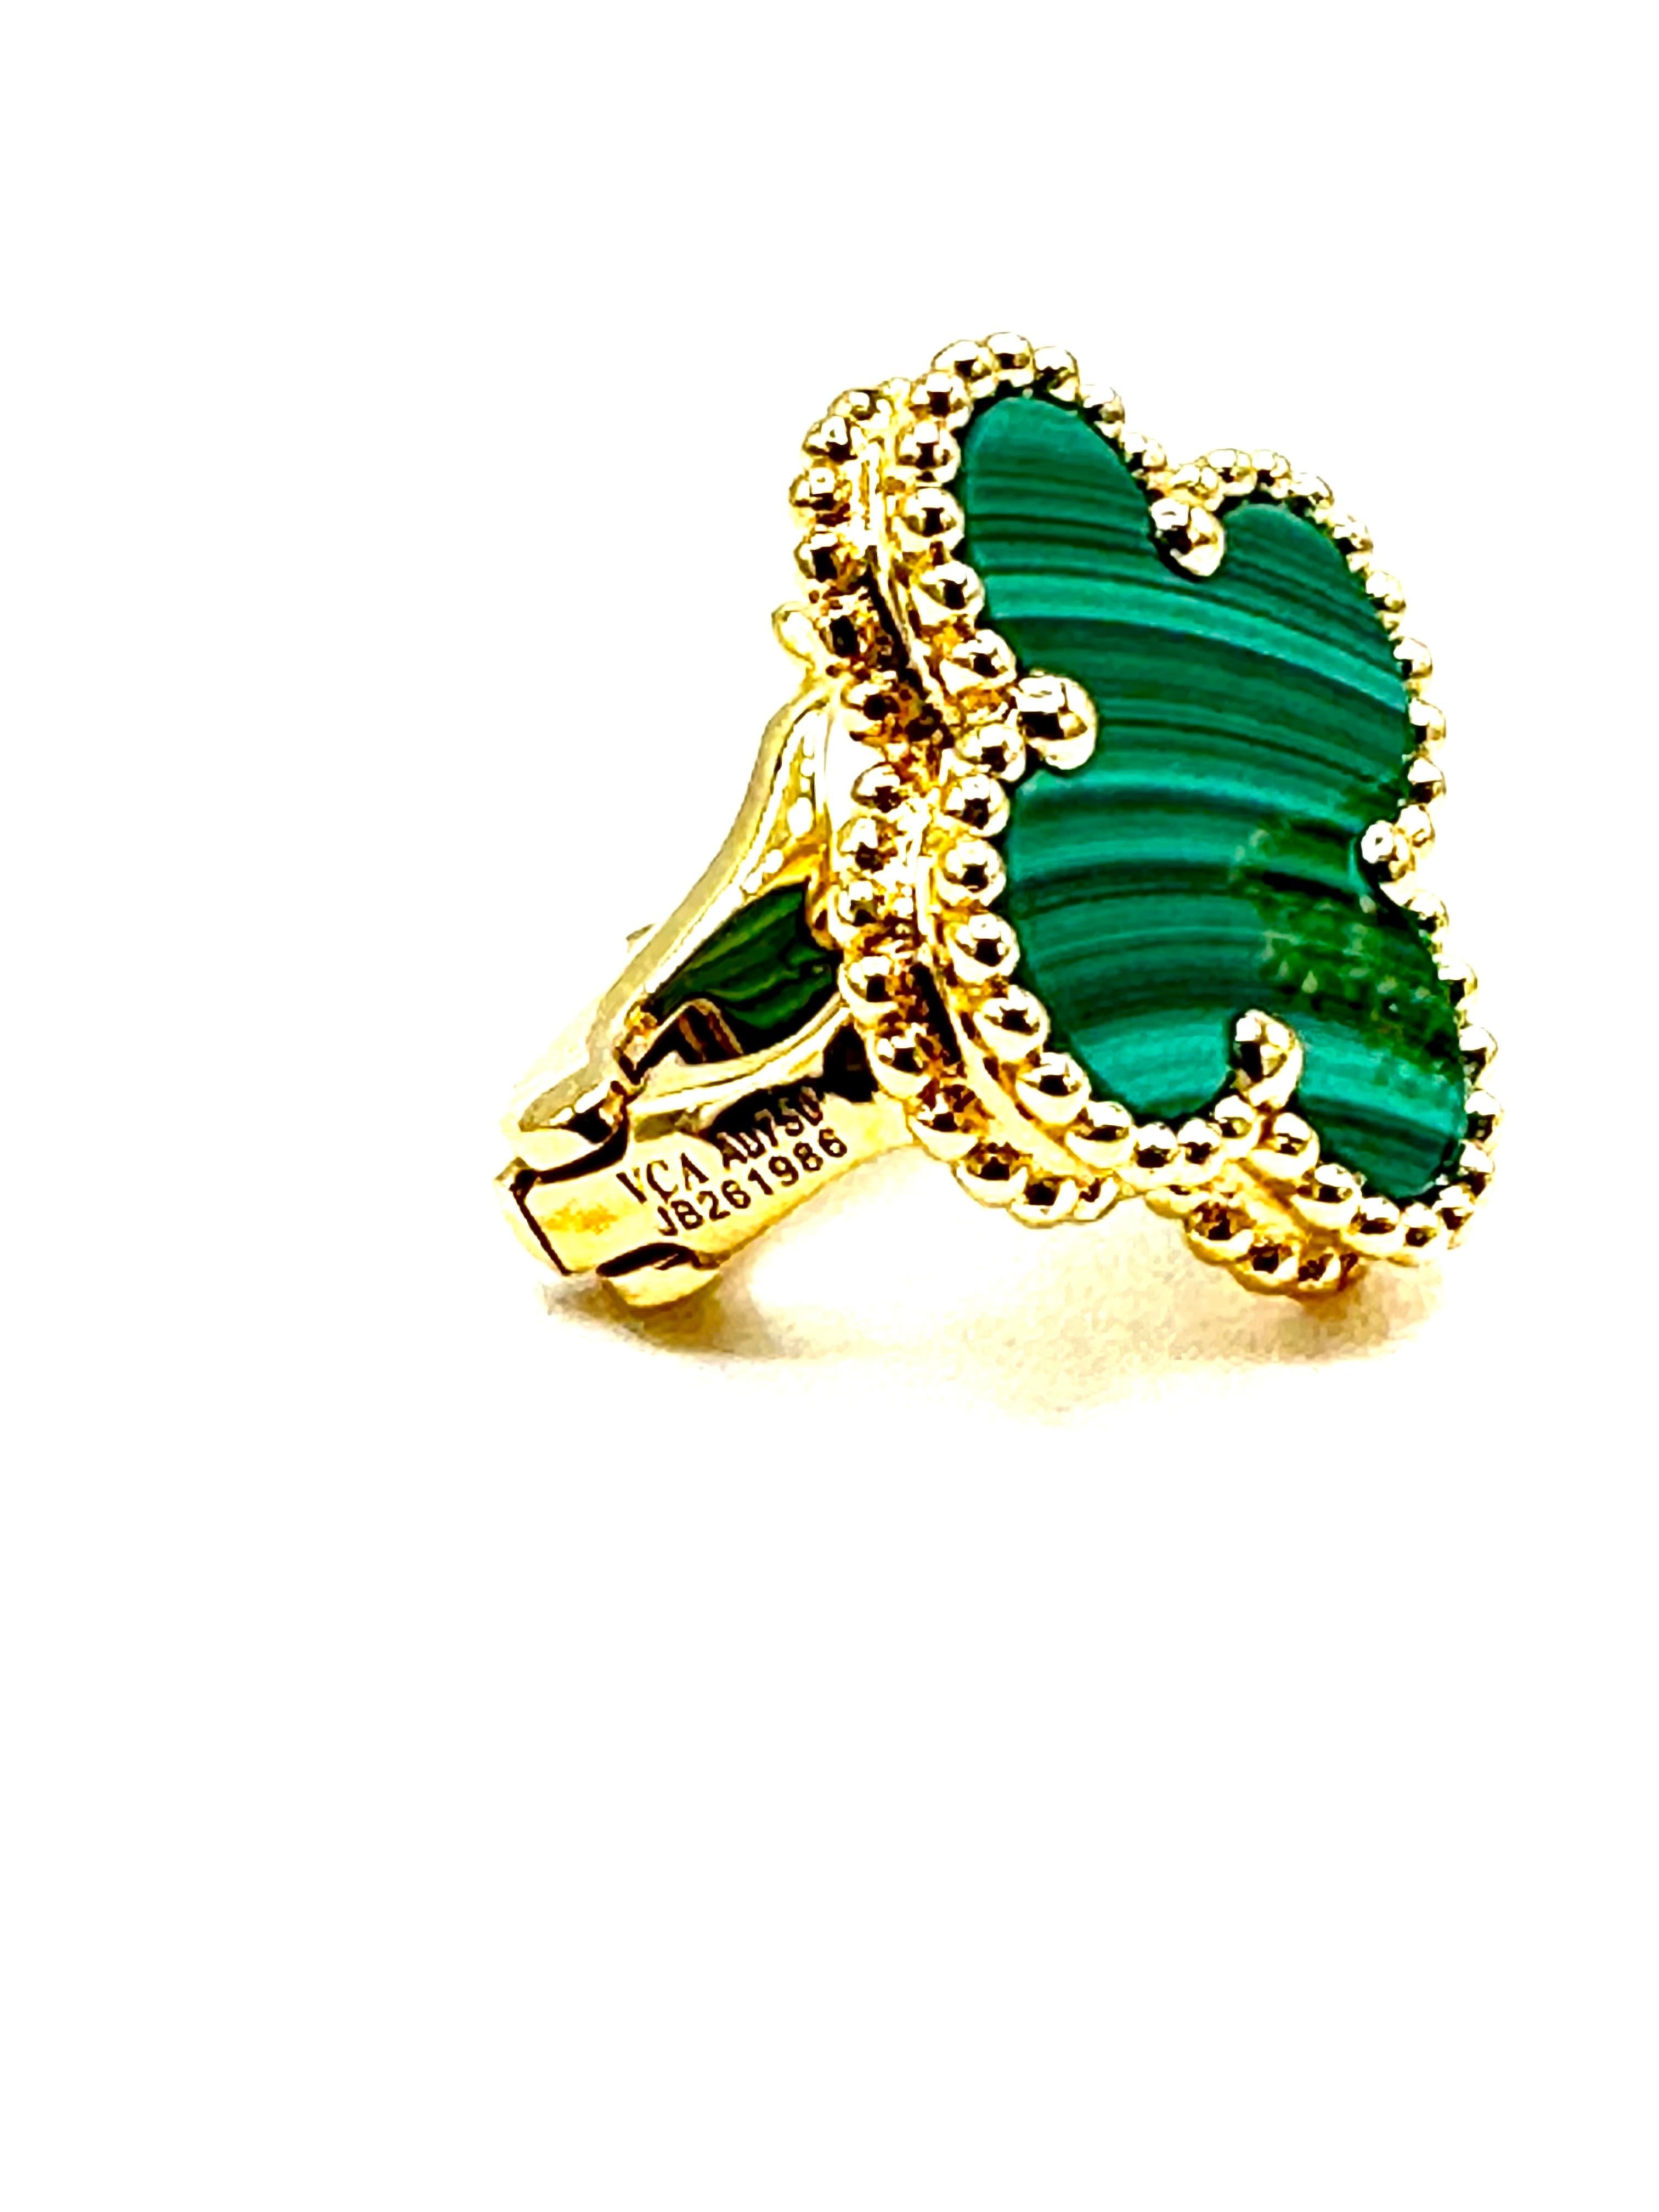 The iconic Van Cleef & Arpels Vintage Alhambra Malachite earrings!  The earrings display a vibrant banded Malachite stone, surrounded in the VCA beaded frame, with an omega clip and post in the back, all in 18K yellow gold.  The earrings are signed